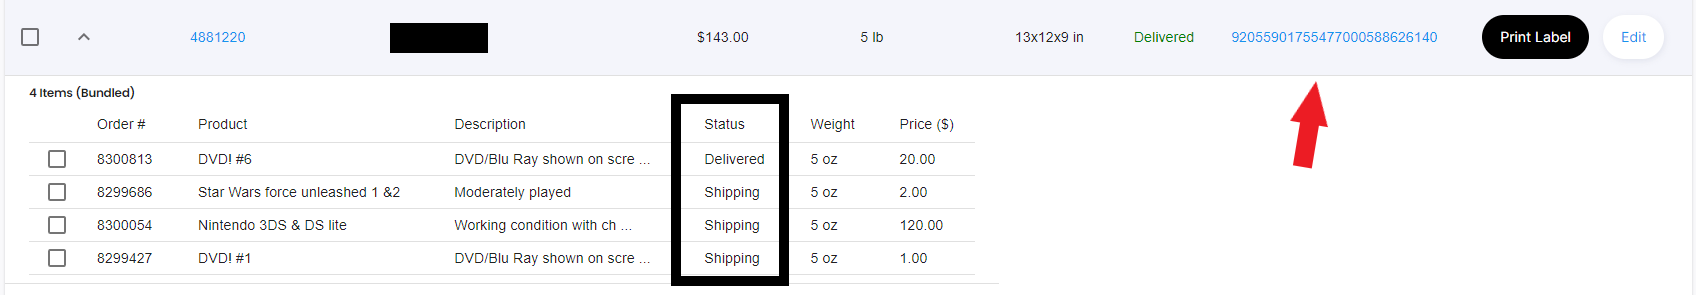 shipping_live_items_1.png